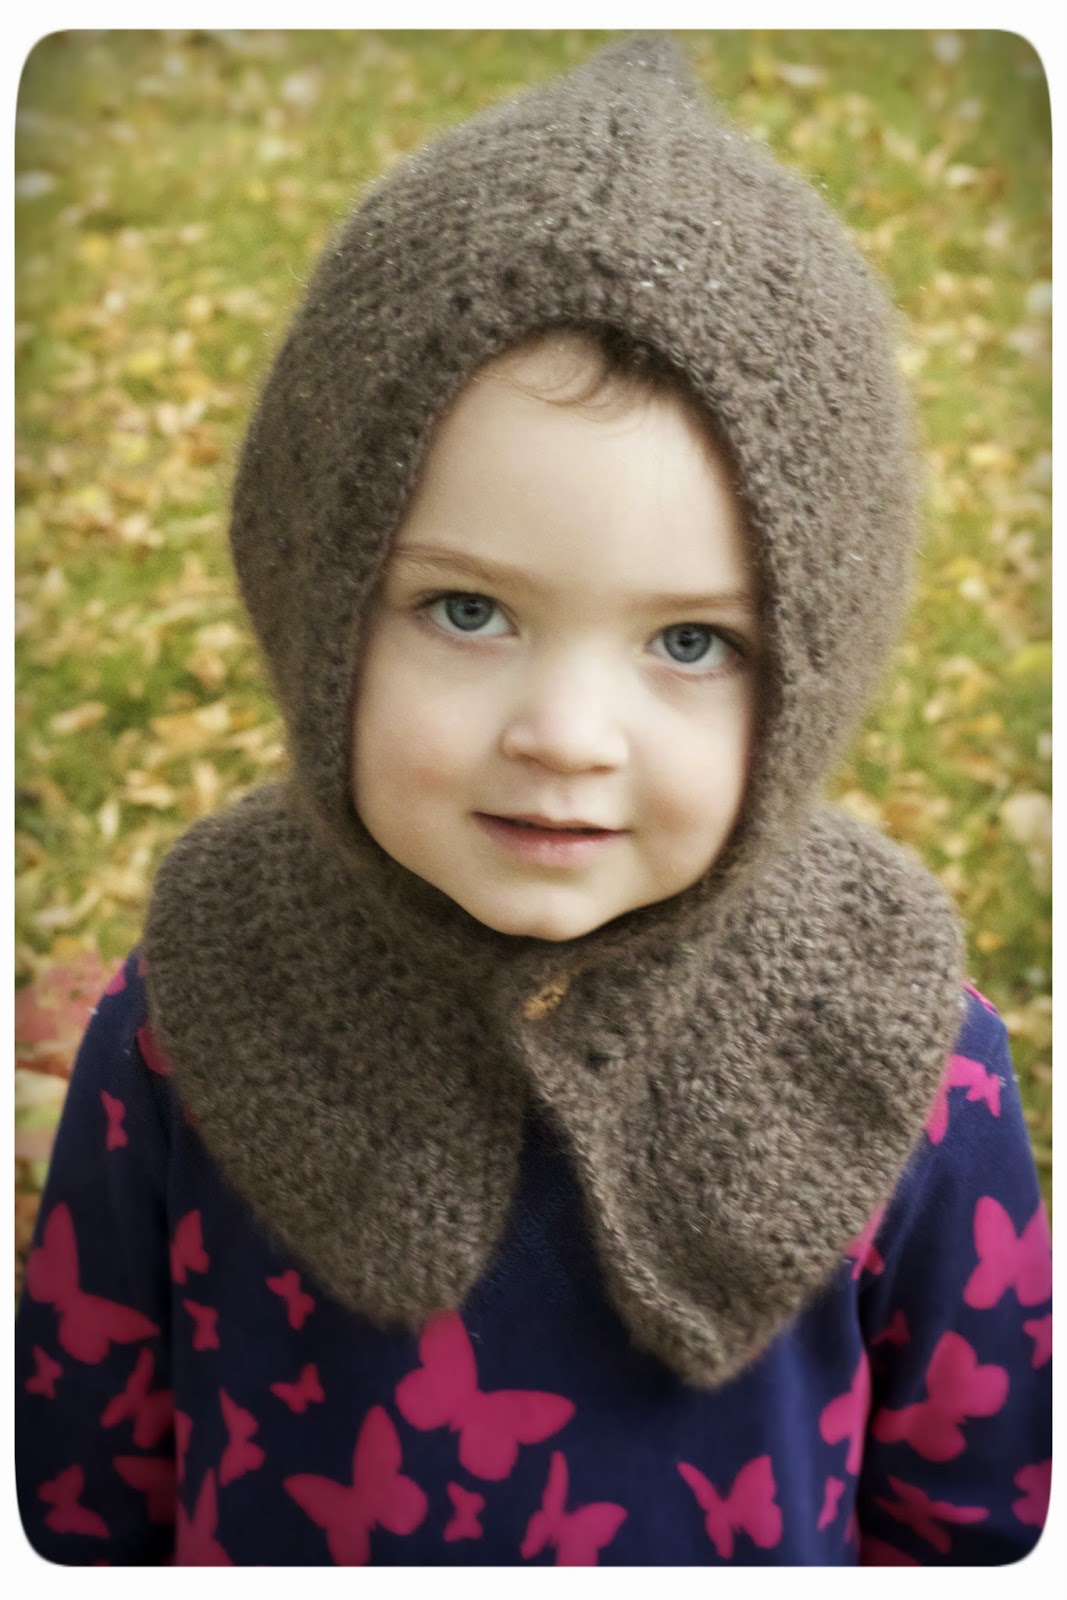 making a good life...one day at a time: crocheted qiviut hood